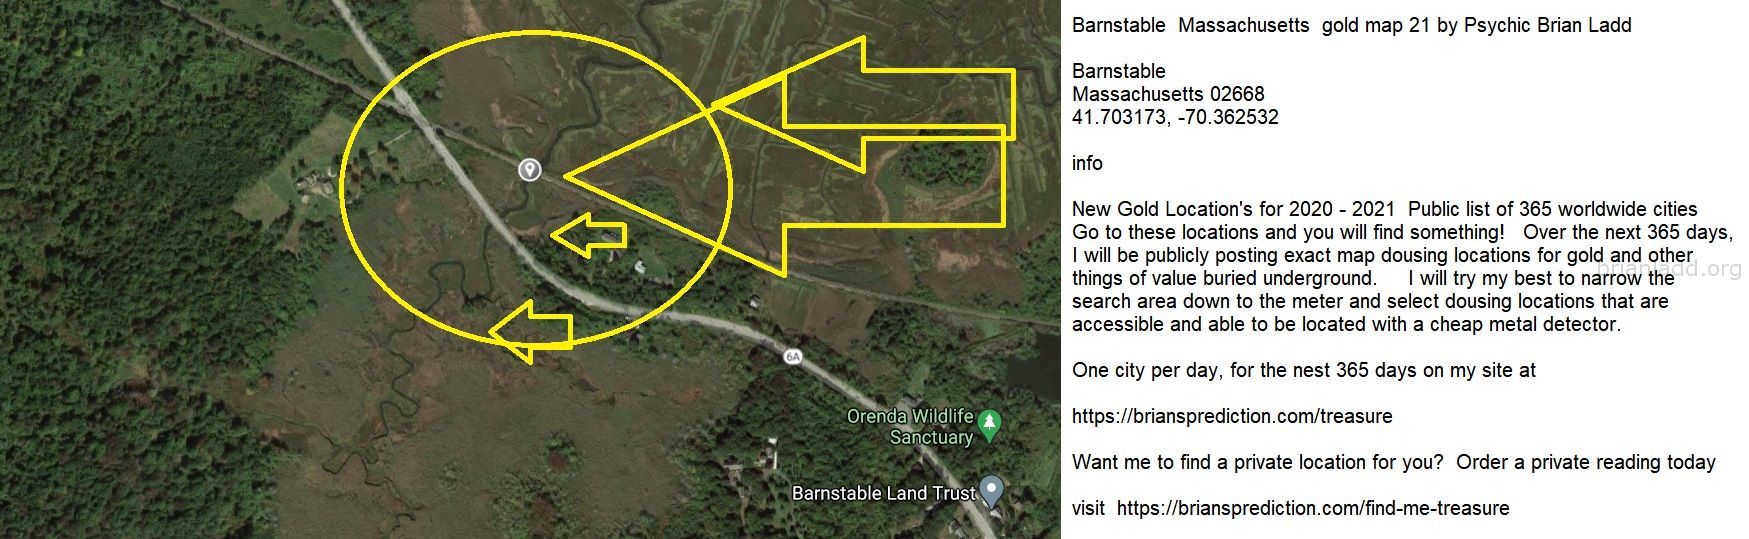 Barnstable  Massachusetts  gold map 21 by Psychic Brian Ladd
New Gold Location's for 2020 - 2021  Public list of 365 worldwide cities   Go to these locations and you will find something!   Over the next 365 days, I will be publicly posting exact map dousing locations for gold and other things of value buried underground.     I will try my best to narrow the search area down to the meter and select dousing locations that are accessible and able to be located with a cheap metal detector. One city per day, for the nest 365 days on my site at:  https://briansprediction.com/treasure  Want me to find a private location for you for anything?  Order a private reading today at:  https://briansprediction.com/find-me-treasure
